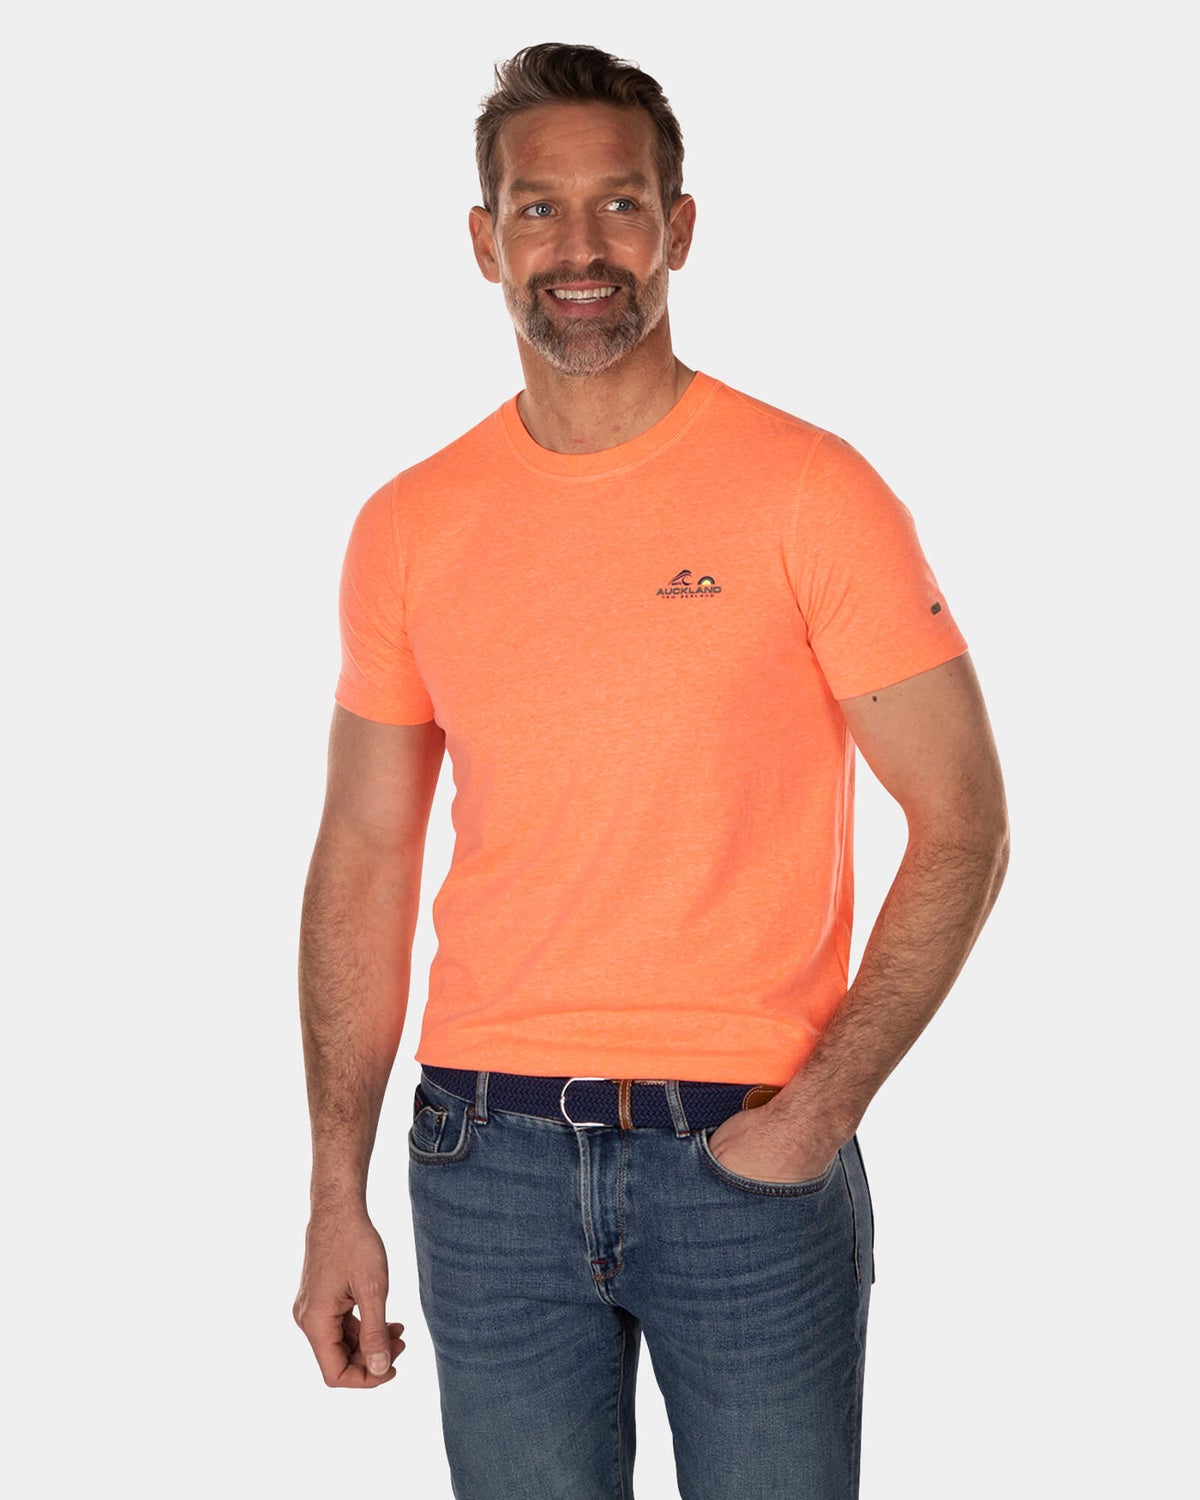 Plain t-shirt made of polyester and cotton - High Summer Orange